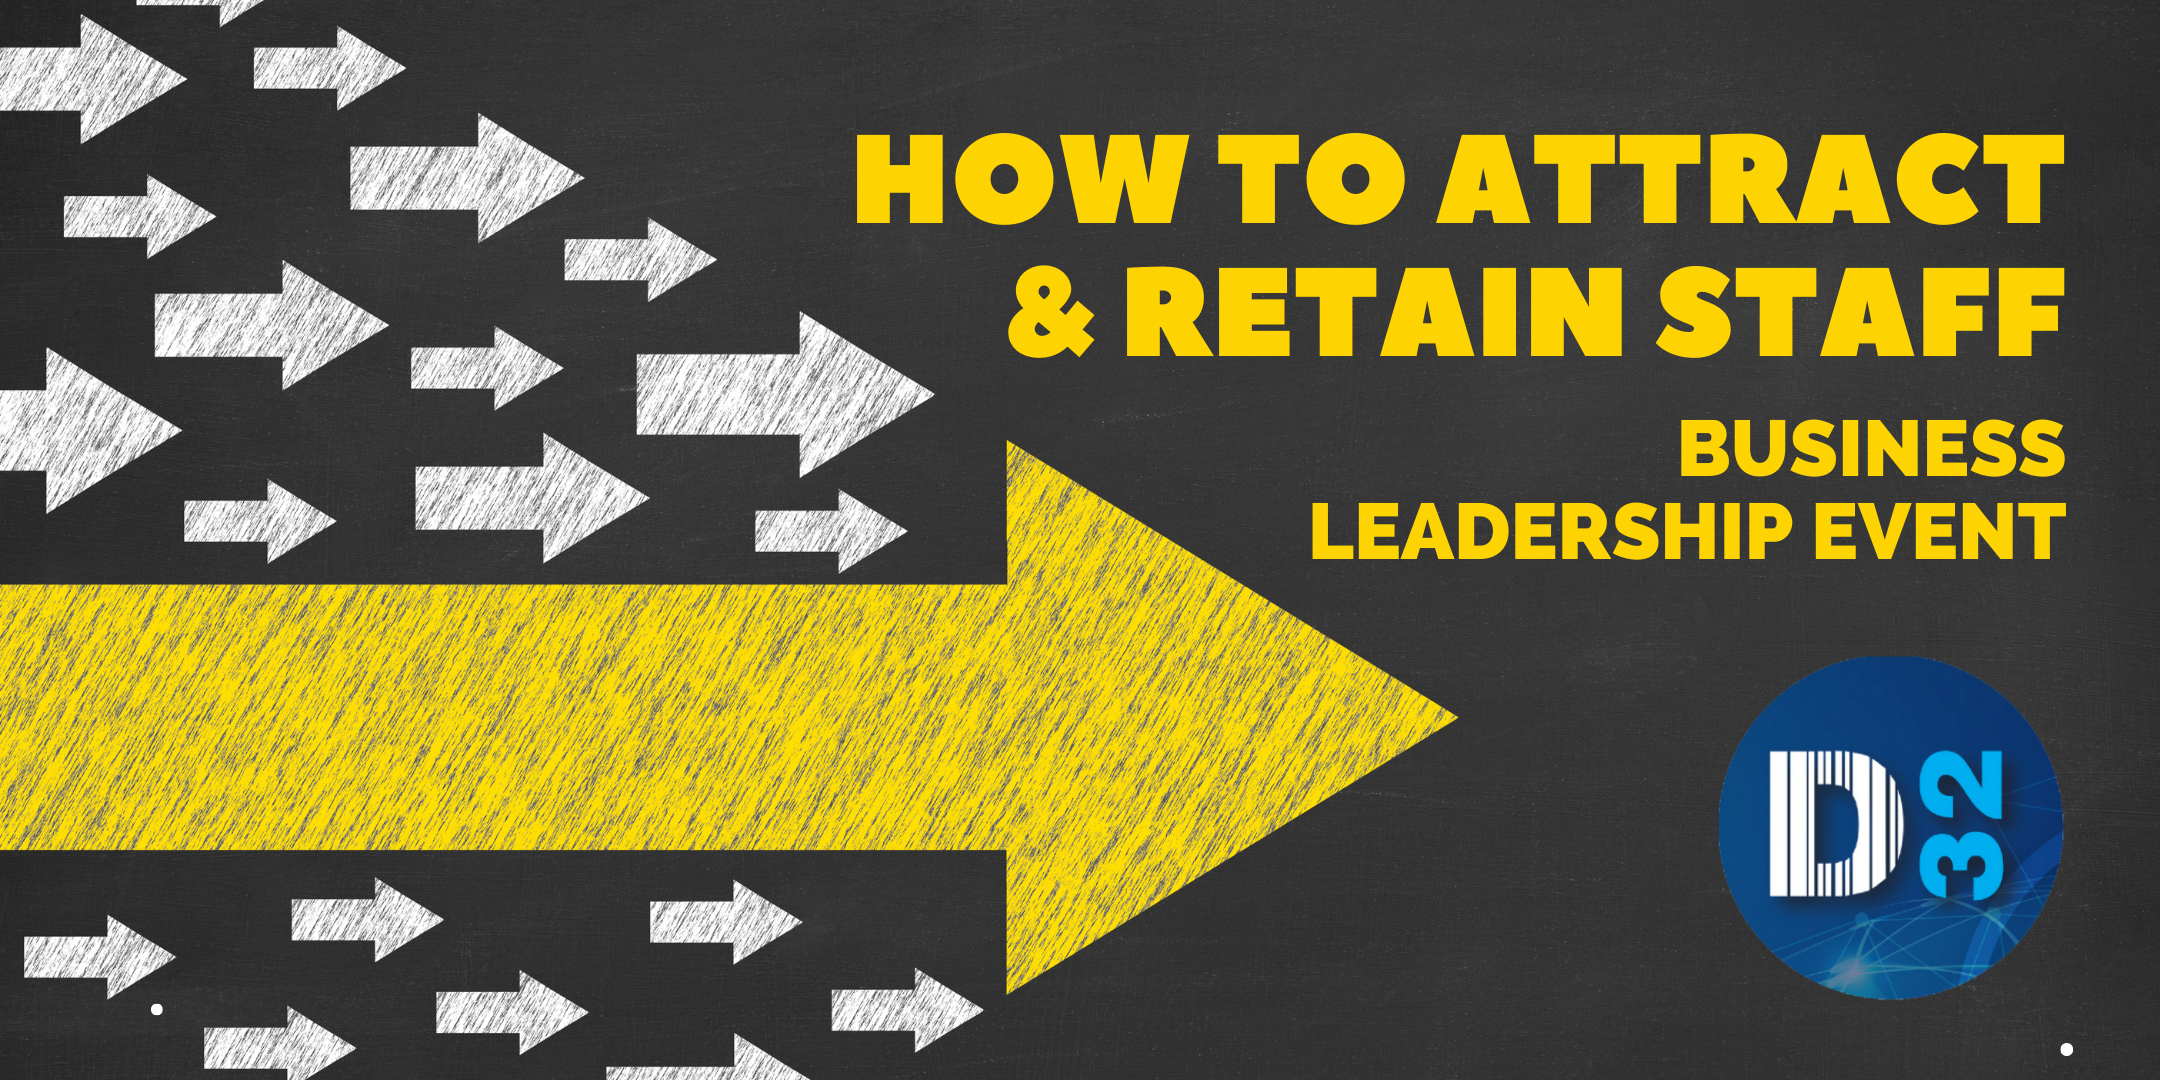 How to attract & retain staff